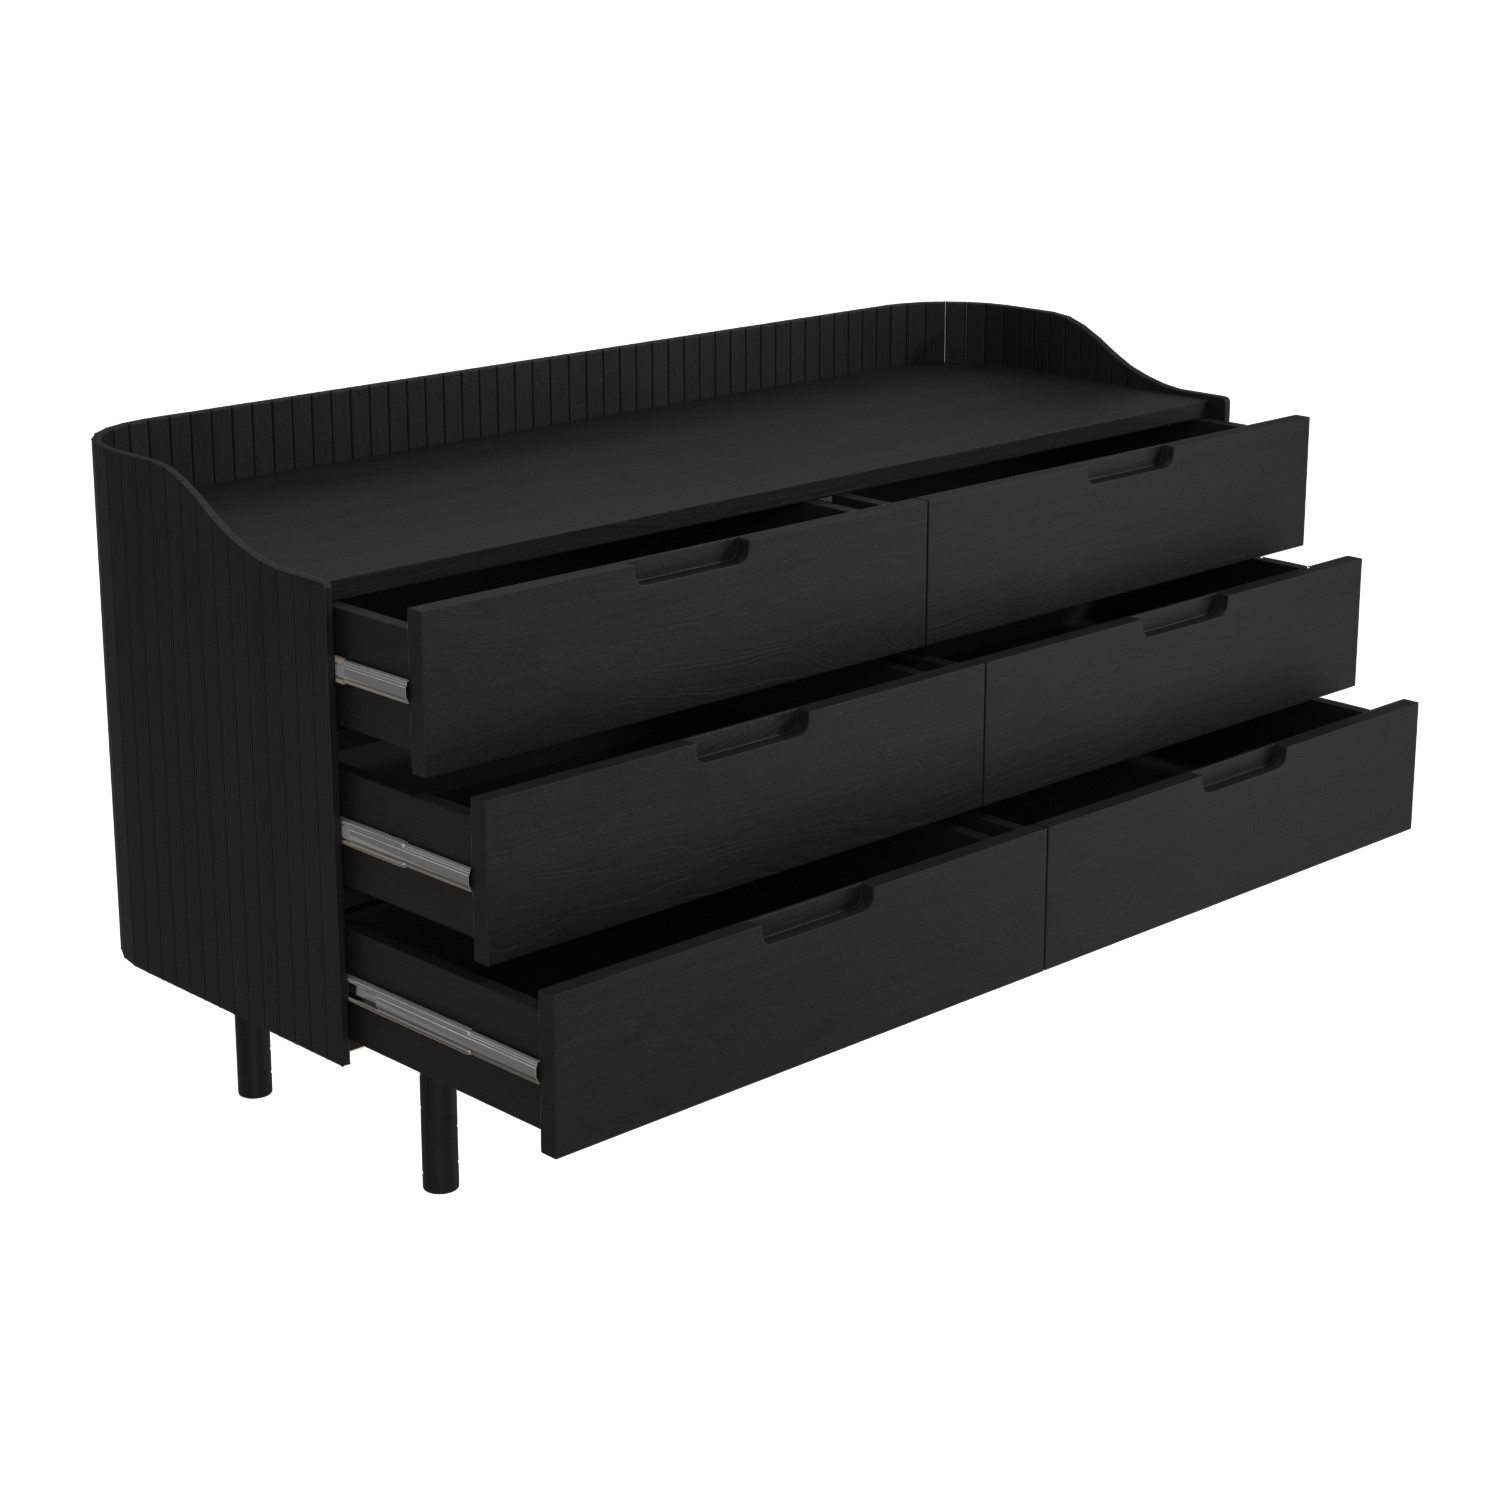 Read more about Wide black mid-century modern chest of 6 drawers saskia